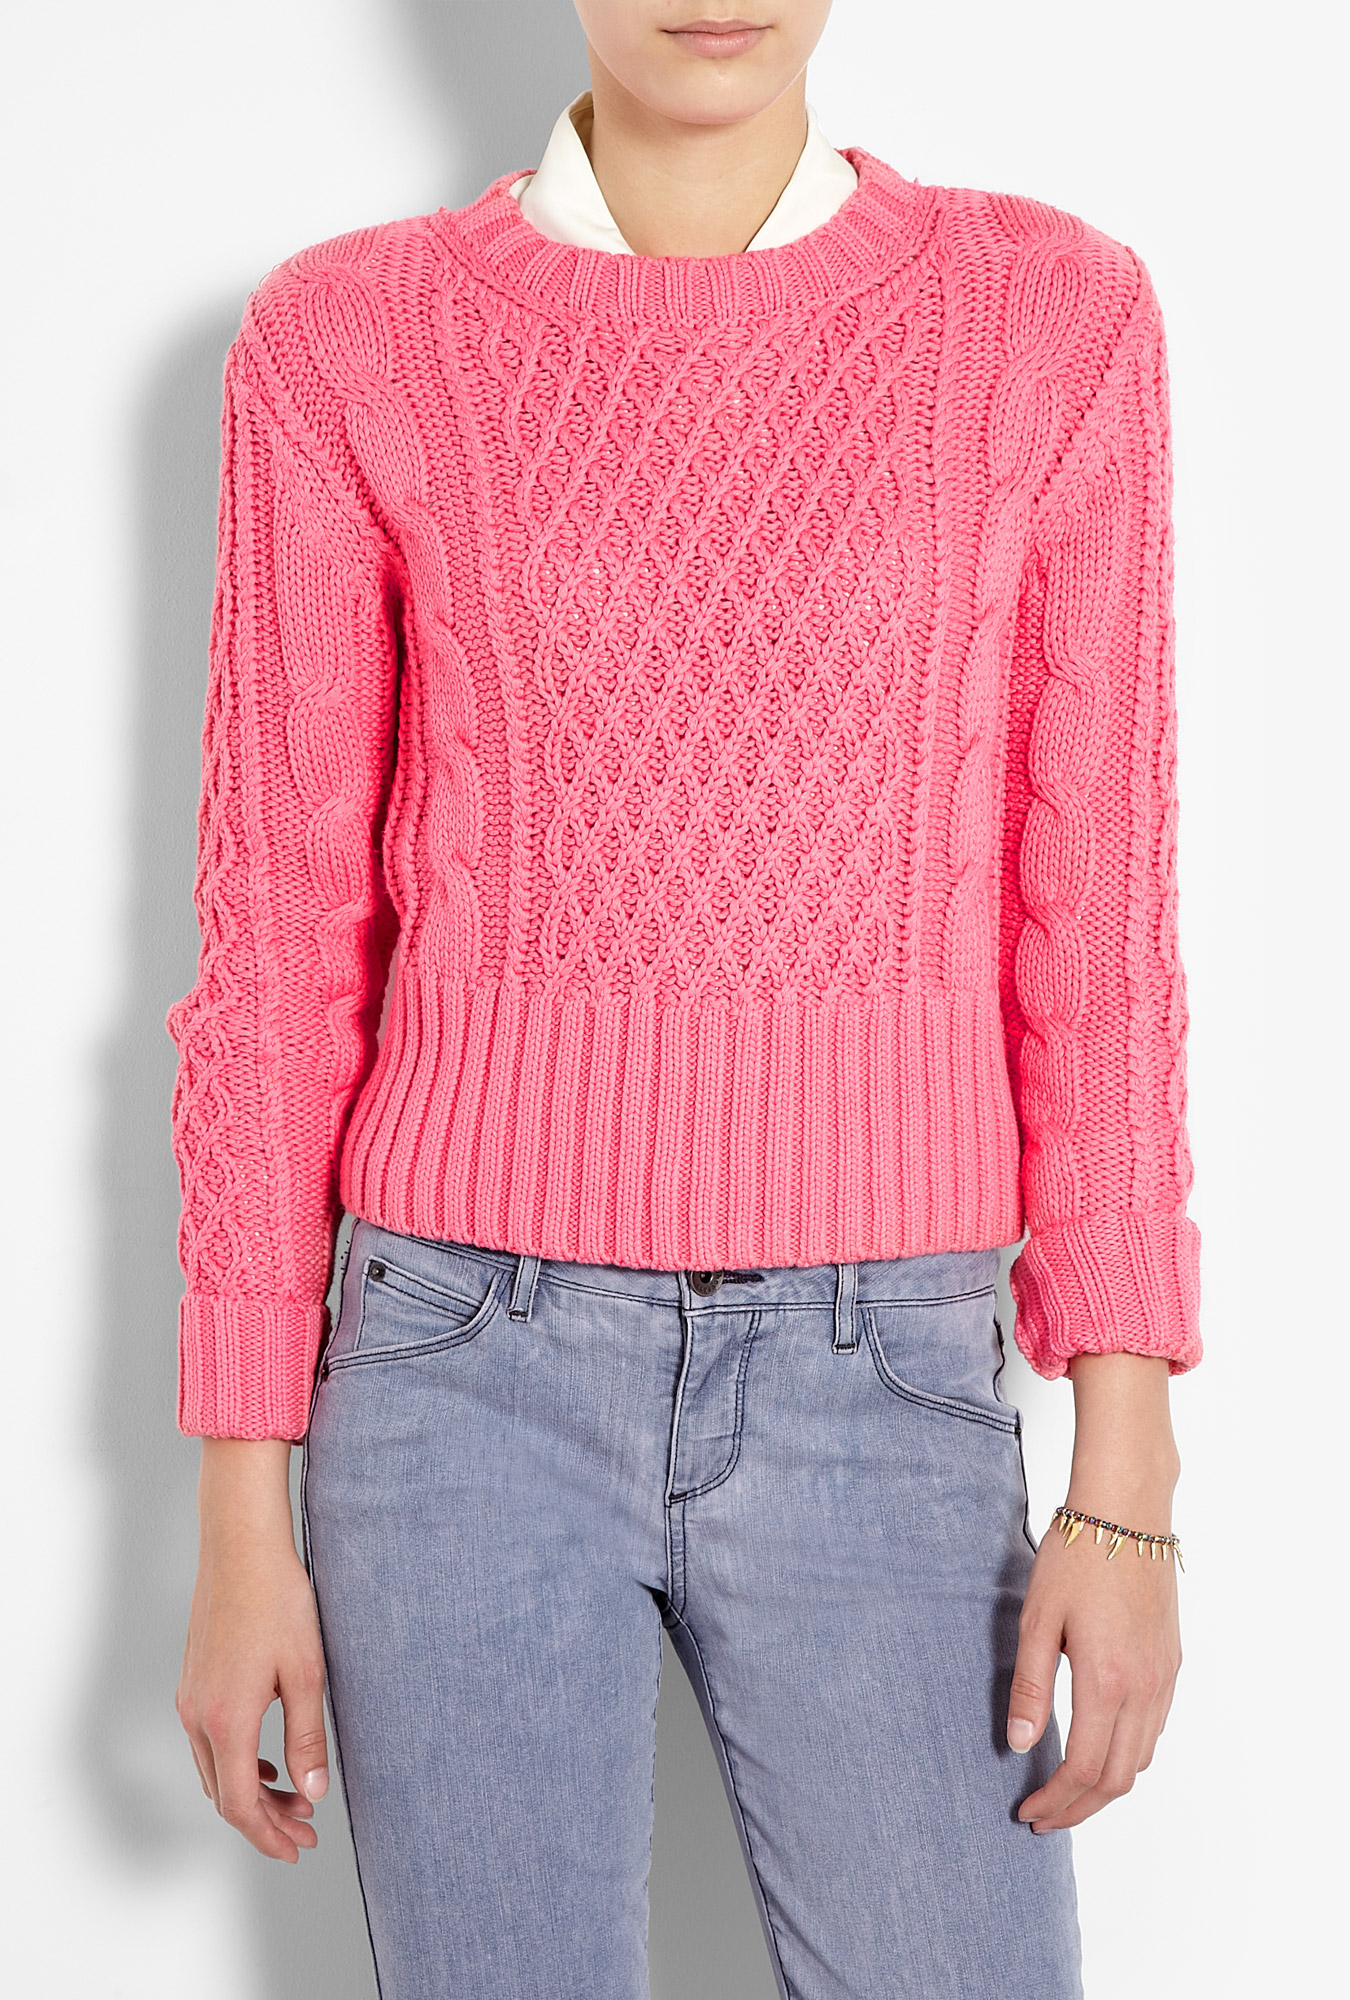 Acne Studios Lia Cable Knit Cropped Jumper in Pink | Lyst